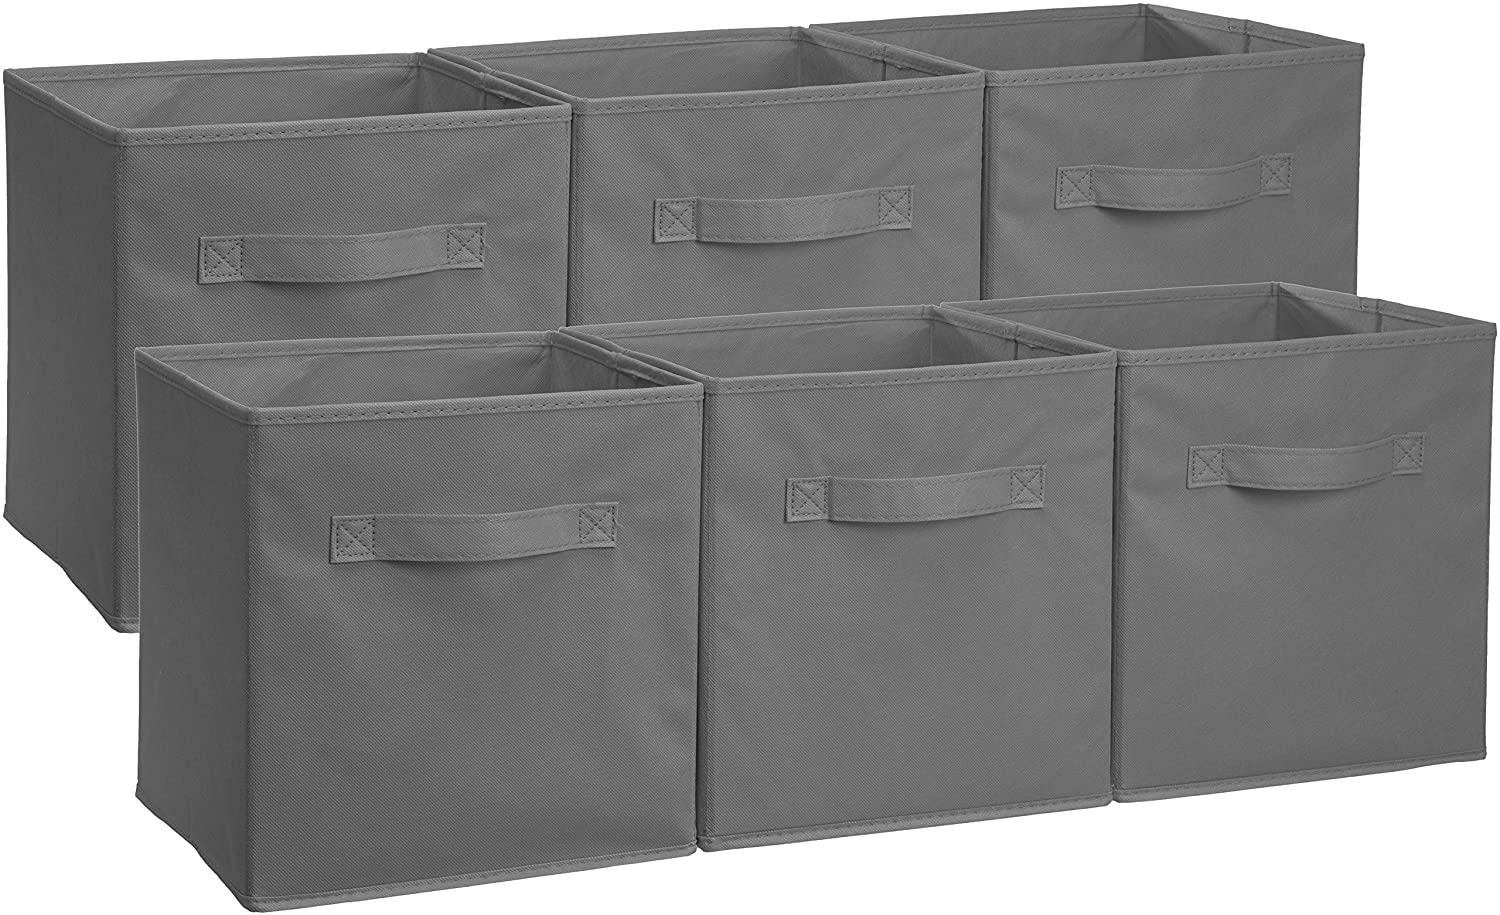 Dark Grey Foldable Cube Storage Bin with Handle 6 Pack 12-Inch Cube 